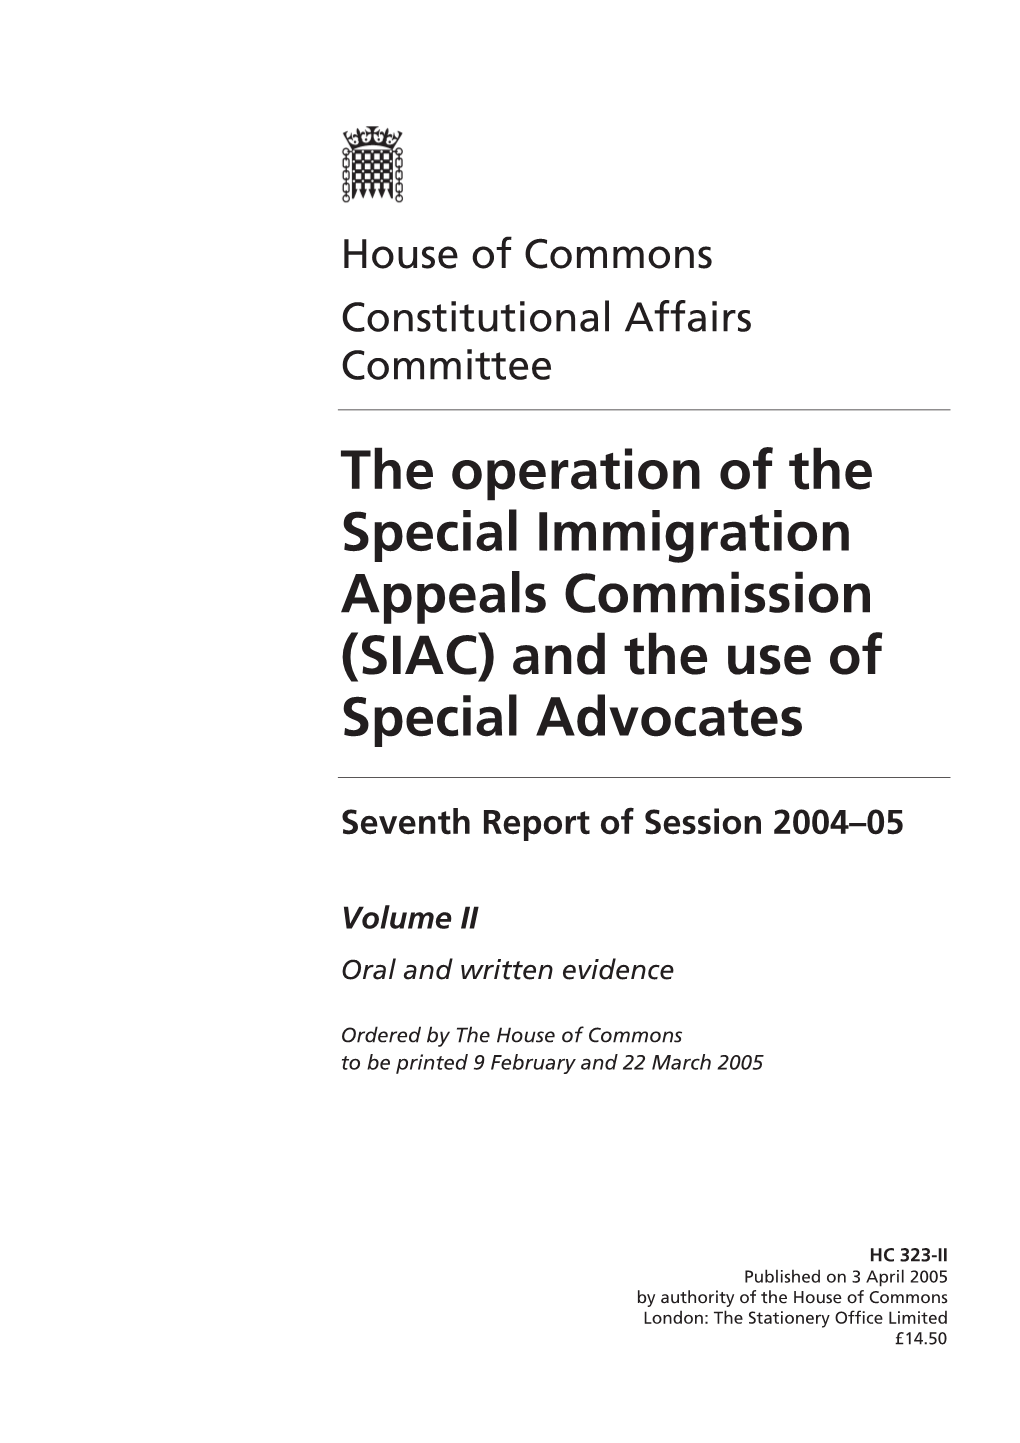 SIAC) and the Use of Special Advocates